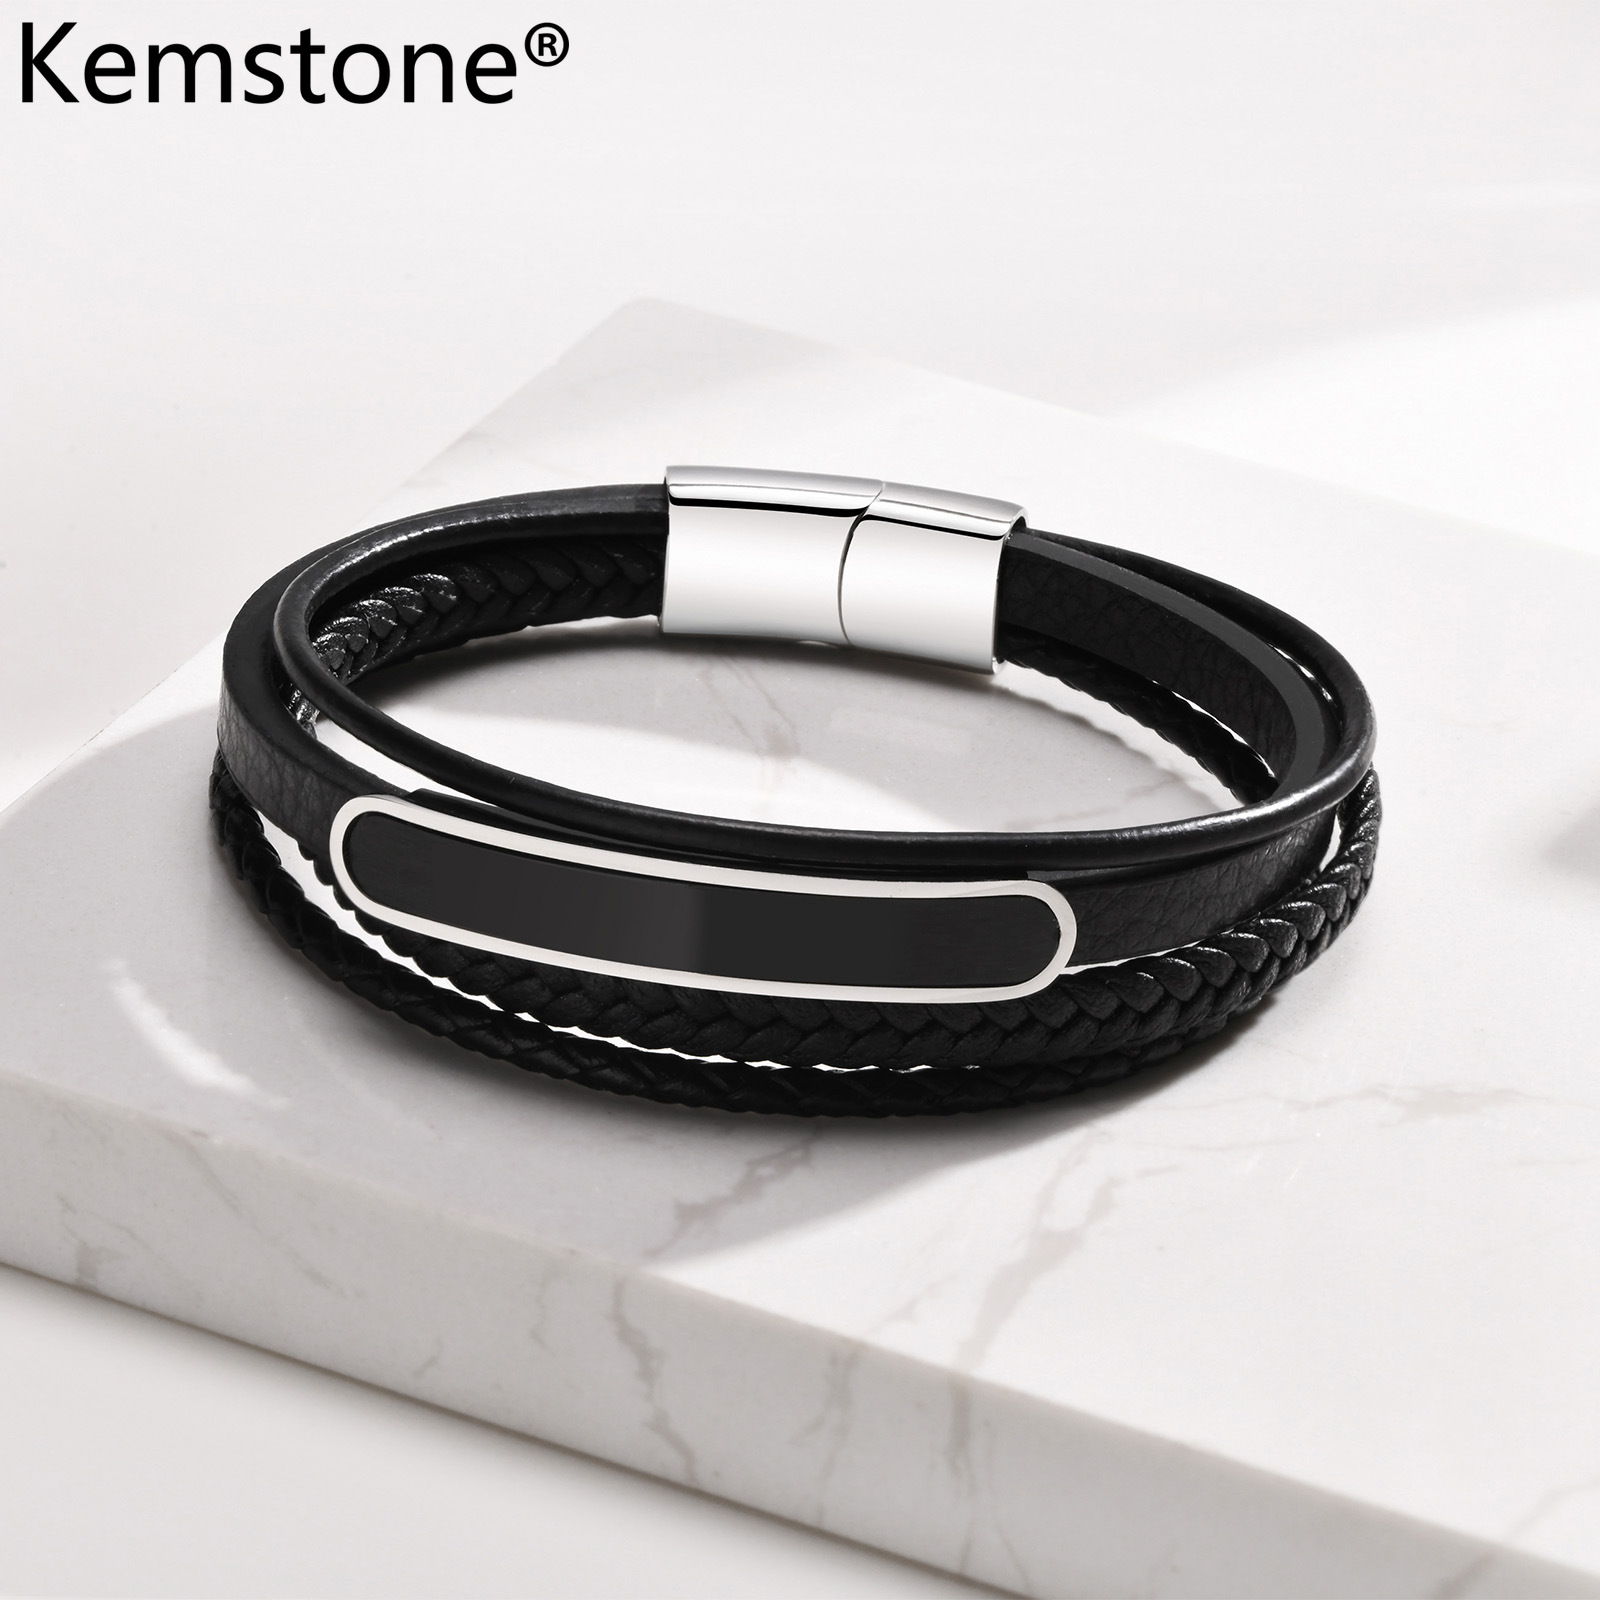 Kemstone Stainless Steel Four Layers Genuine Leather Black Empty Bangle